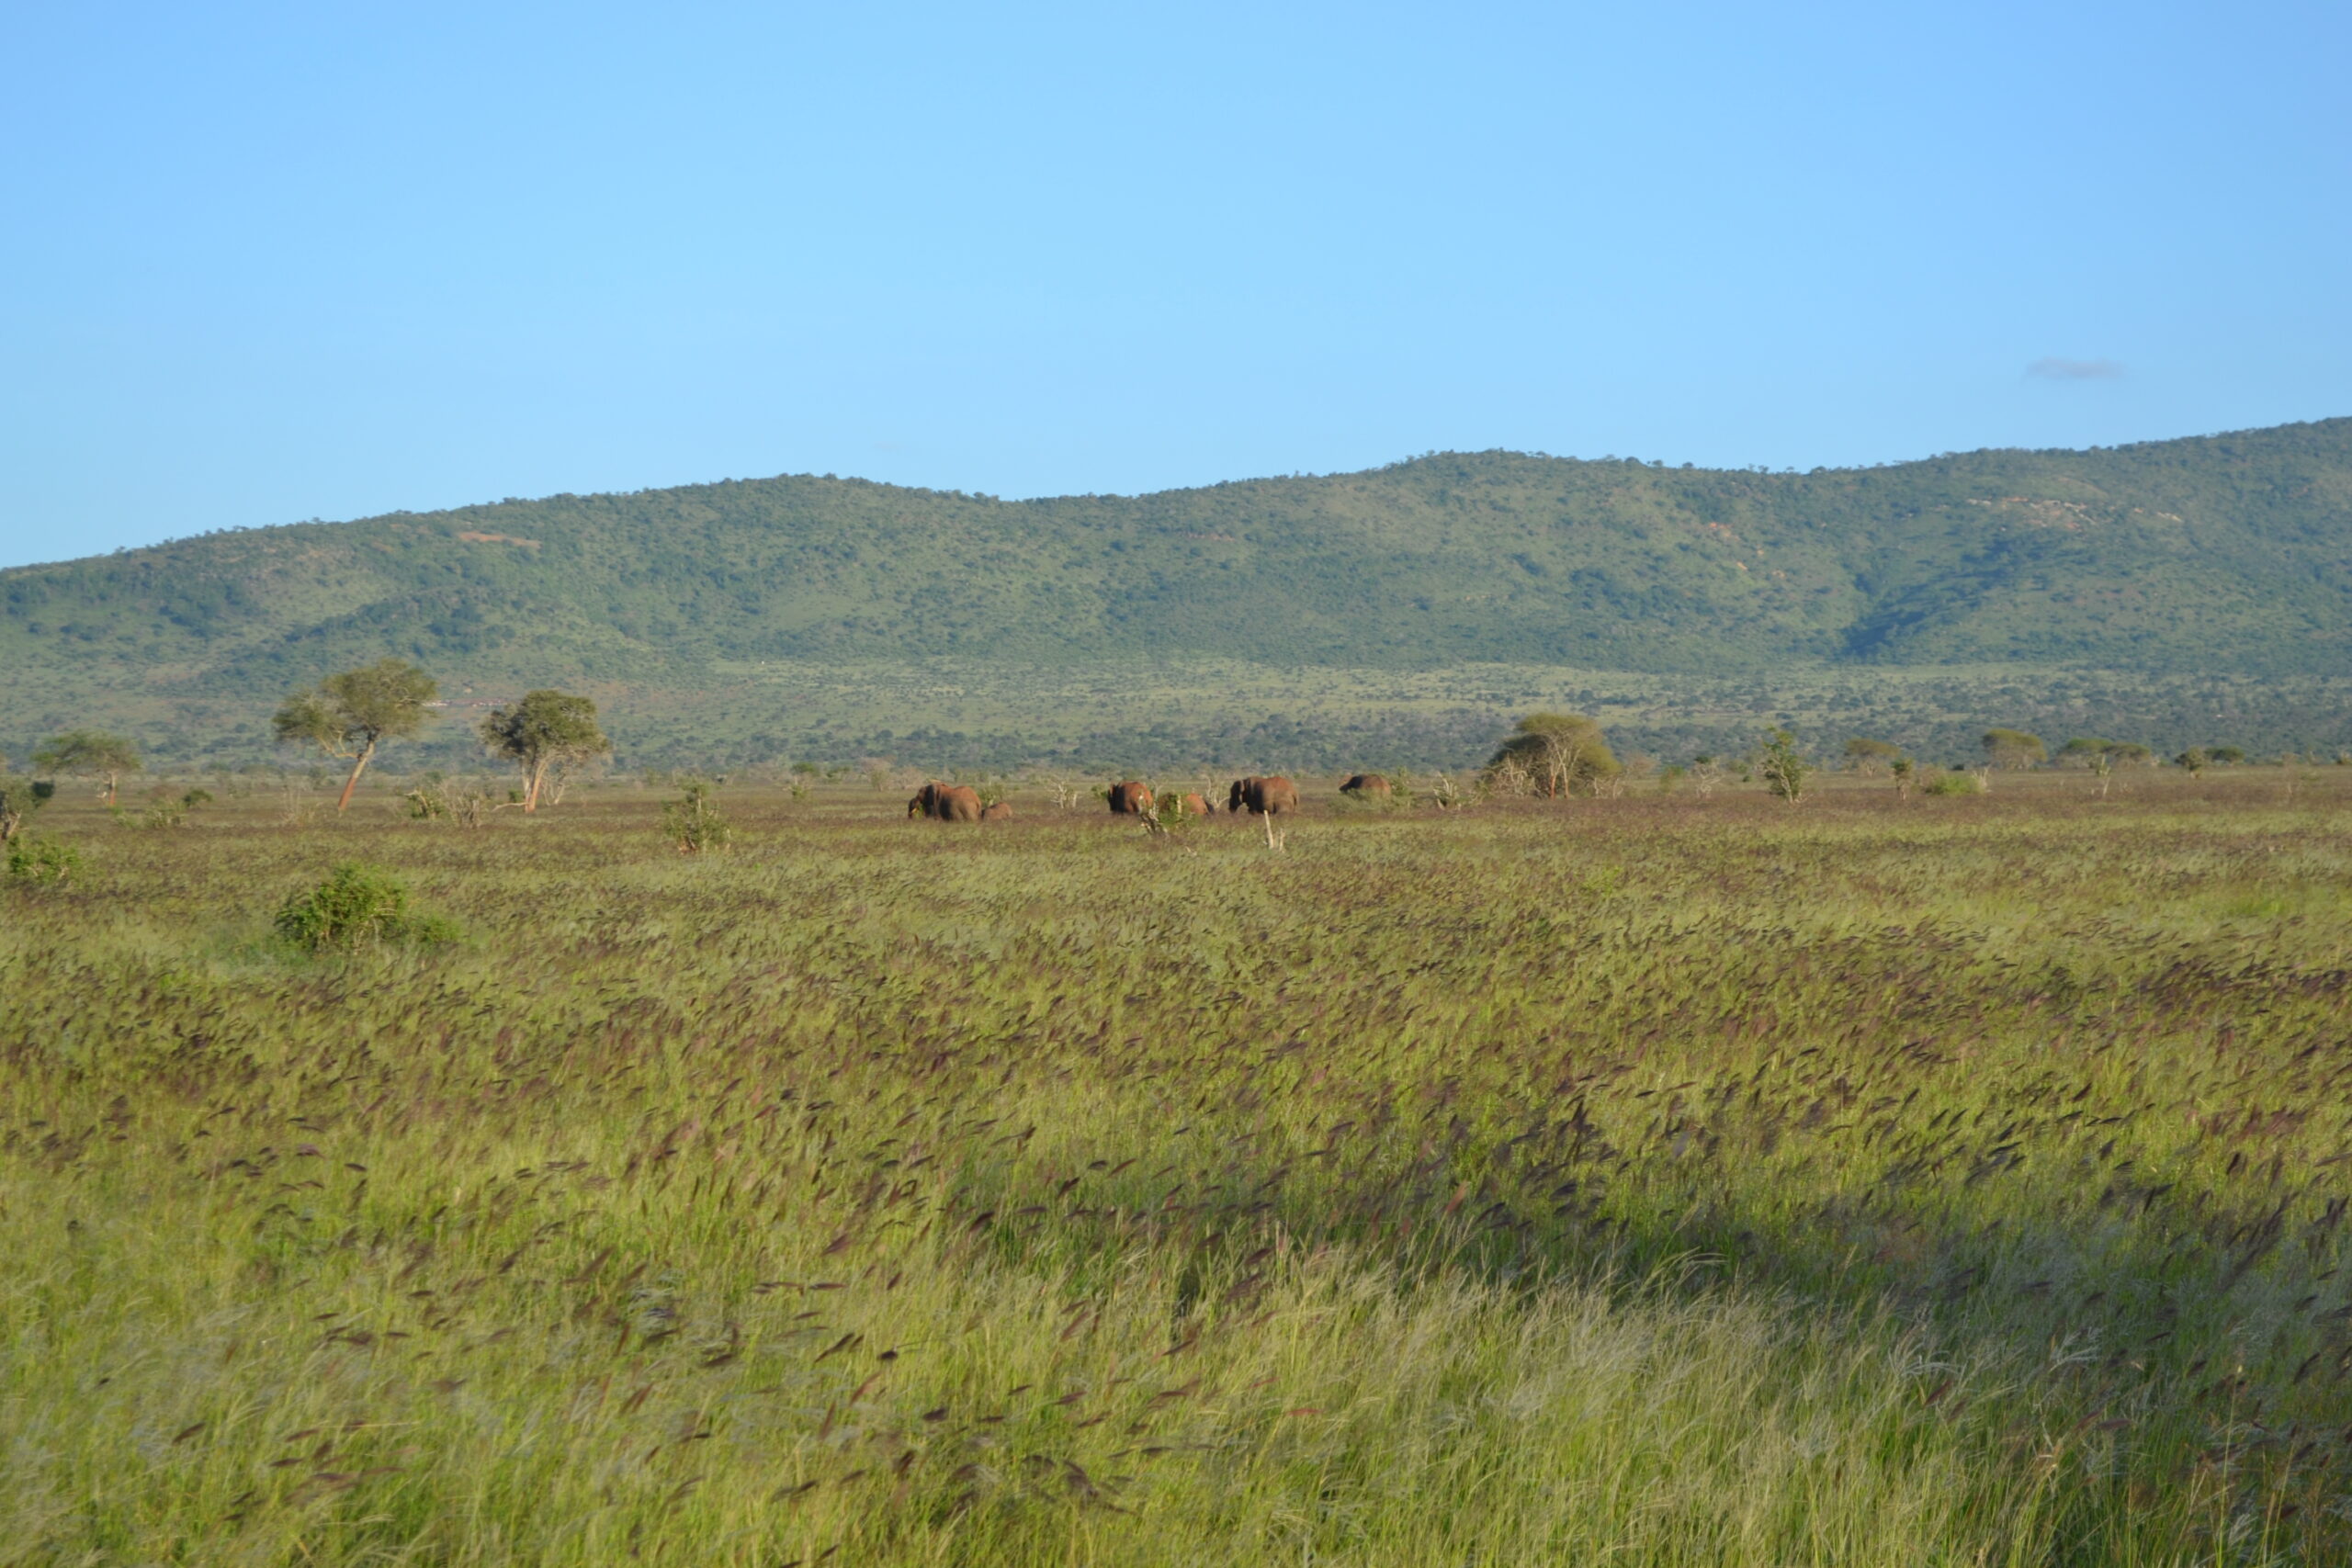 Photograph of a savanna landscape with hills in the background. The photo shows grasses growing on a flat plain in the foreground with hills rising in the background. In the mid-distance are elephants and a few trees.